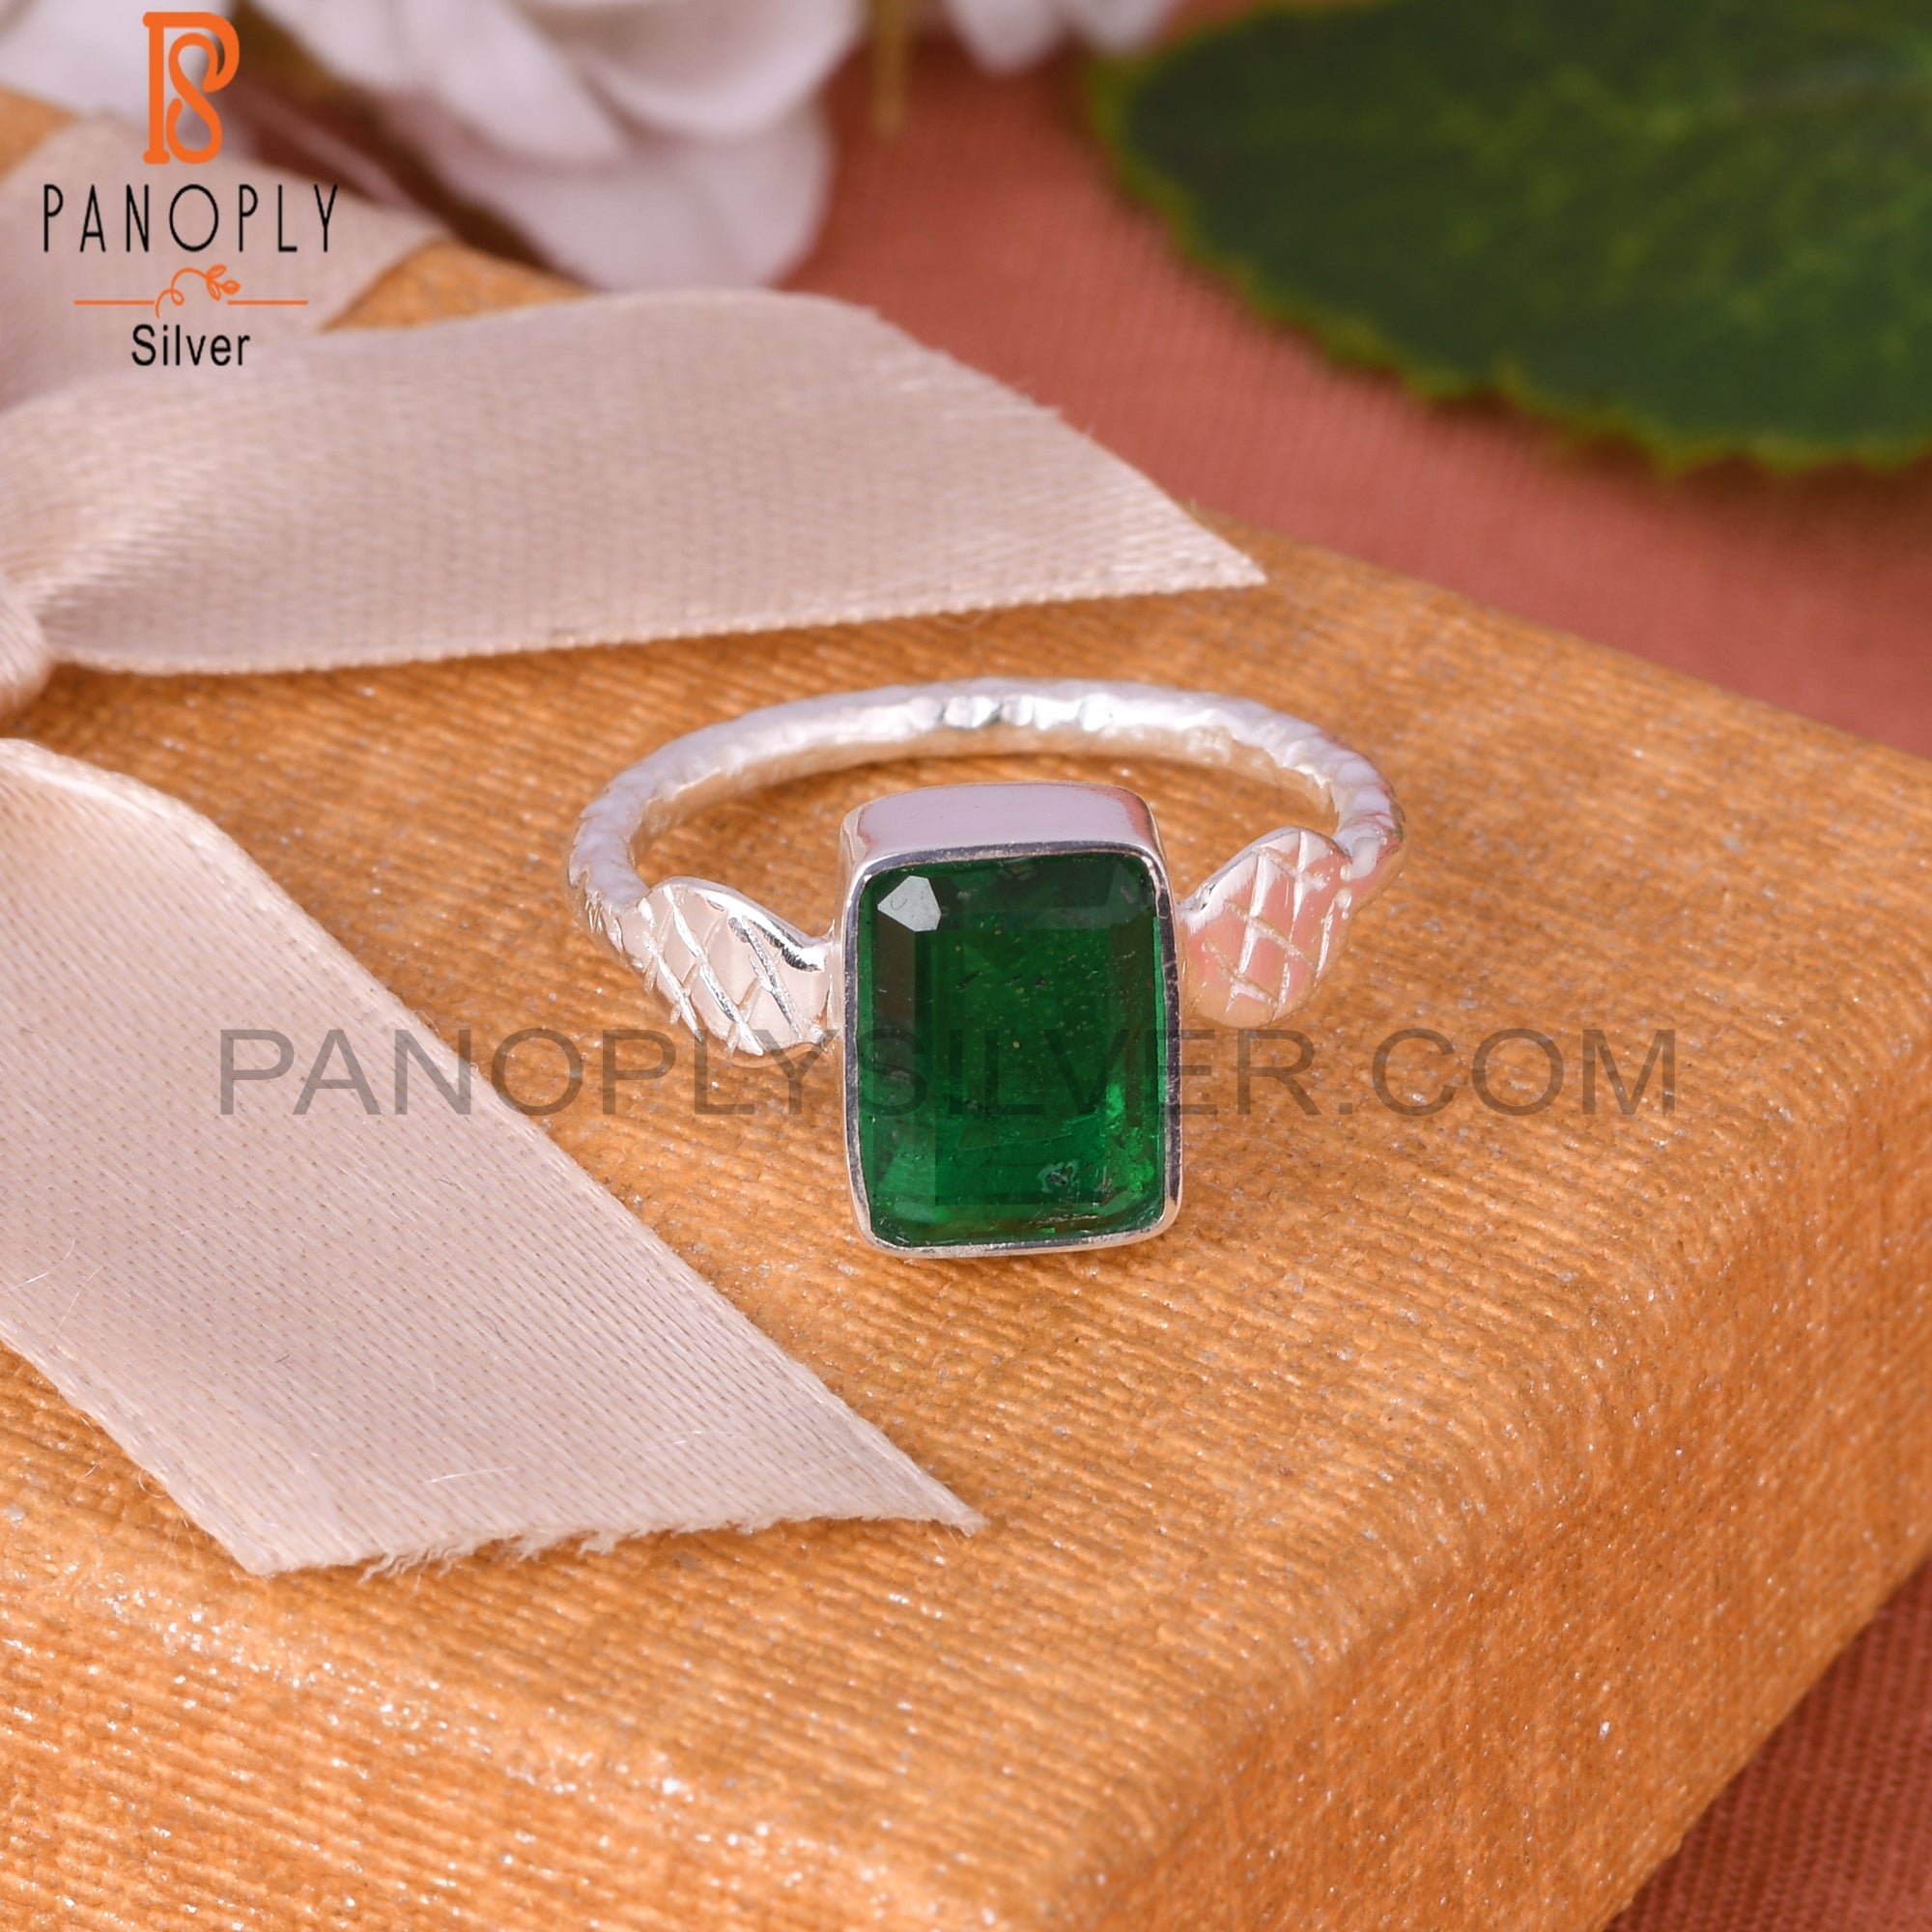 Clara Certified Emerald (Panna) 5.5cts or 6.25ratti 4 Prongs Silver Ring  for men and women-10 : Clara: Amazon.in: Fashion